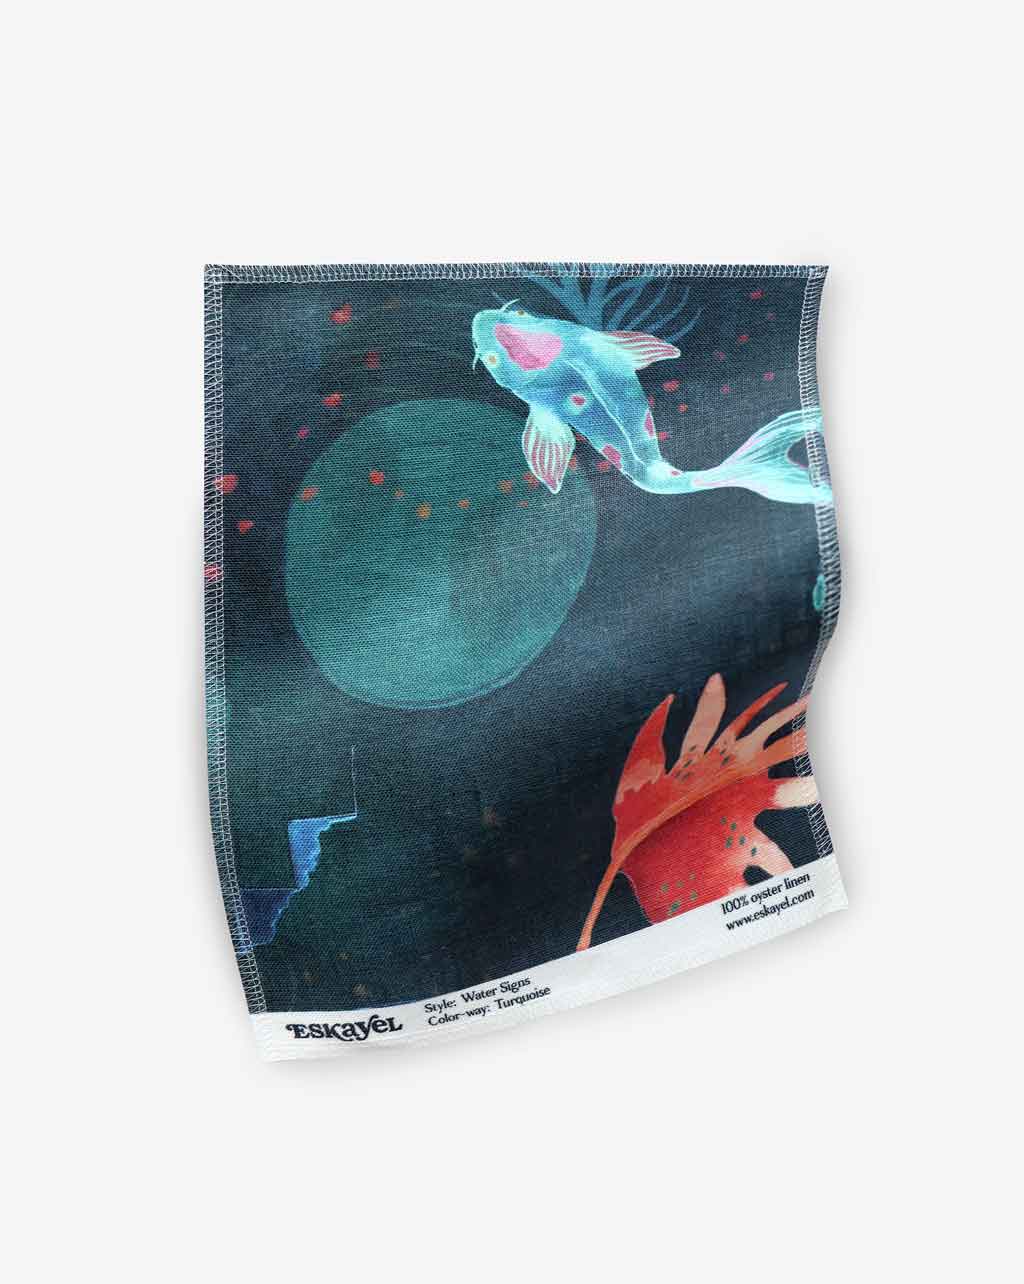 Water Signs Fabric Turquoise with an image of a koi fish in the ocean